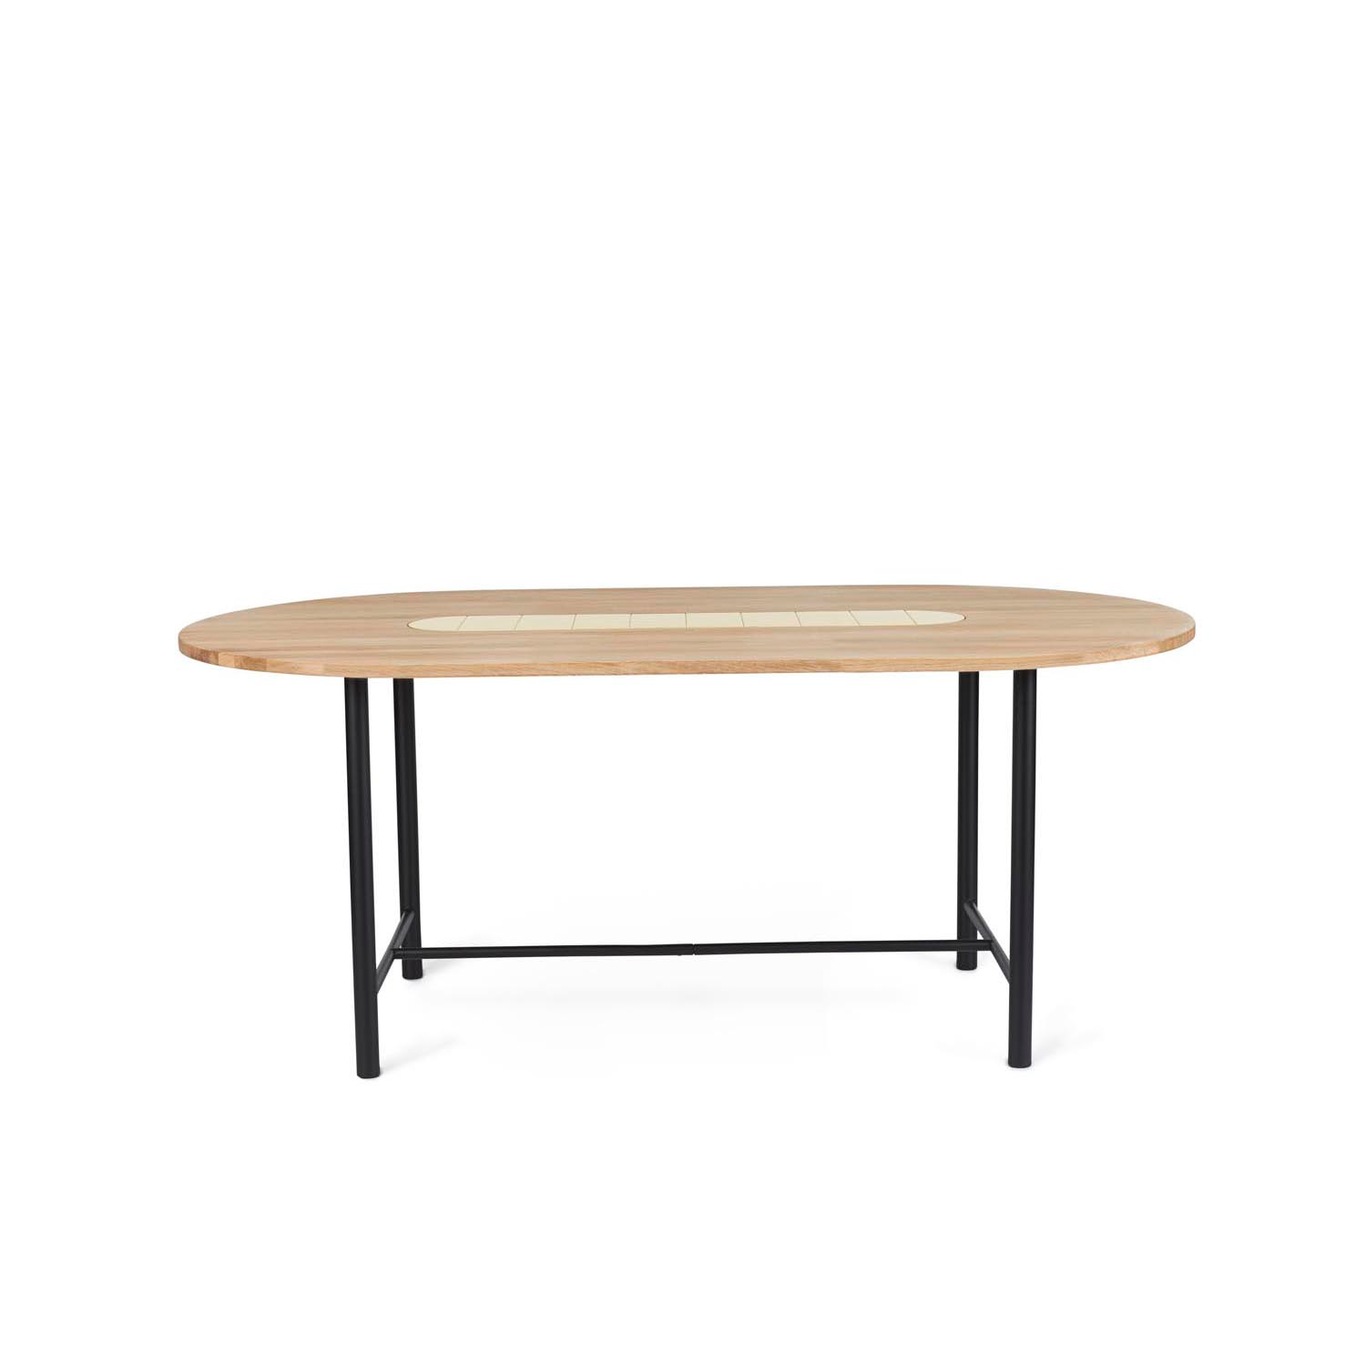 Be My Guest Dining Table 180 cm, White Oiled Oak